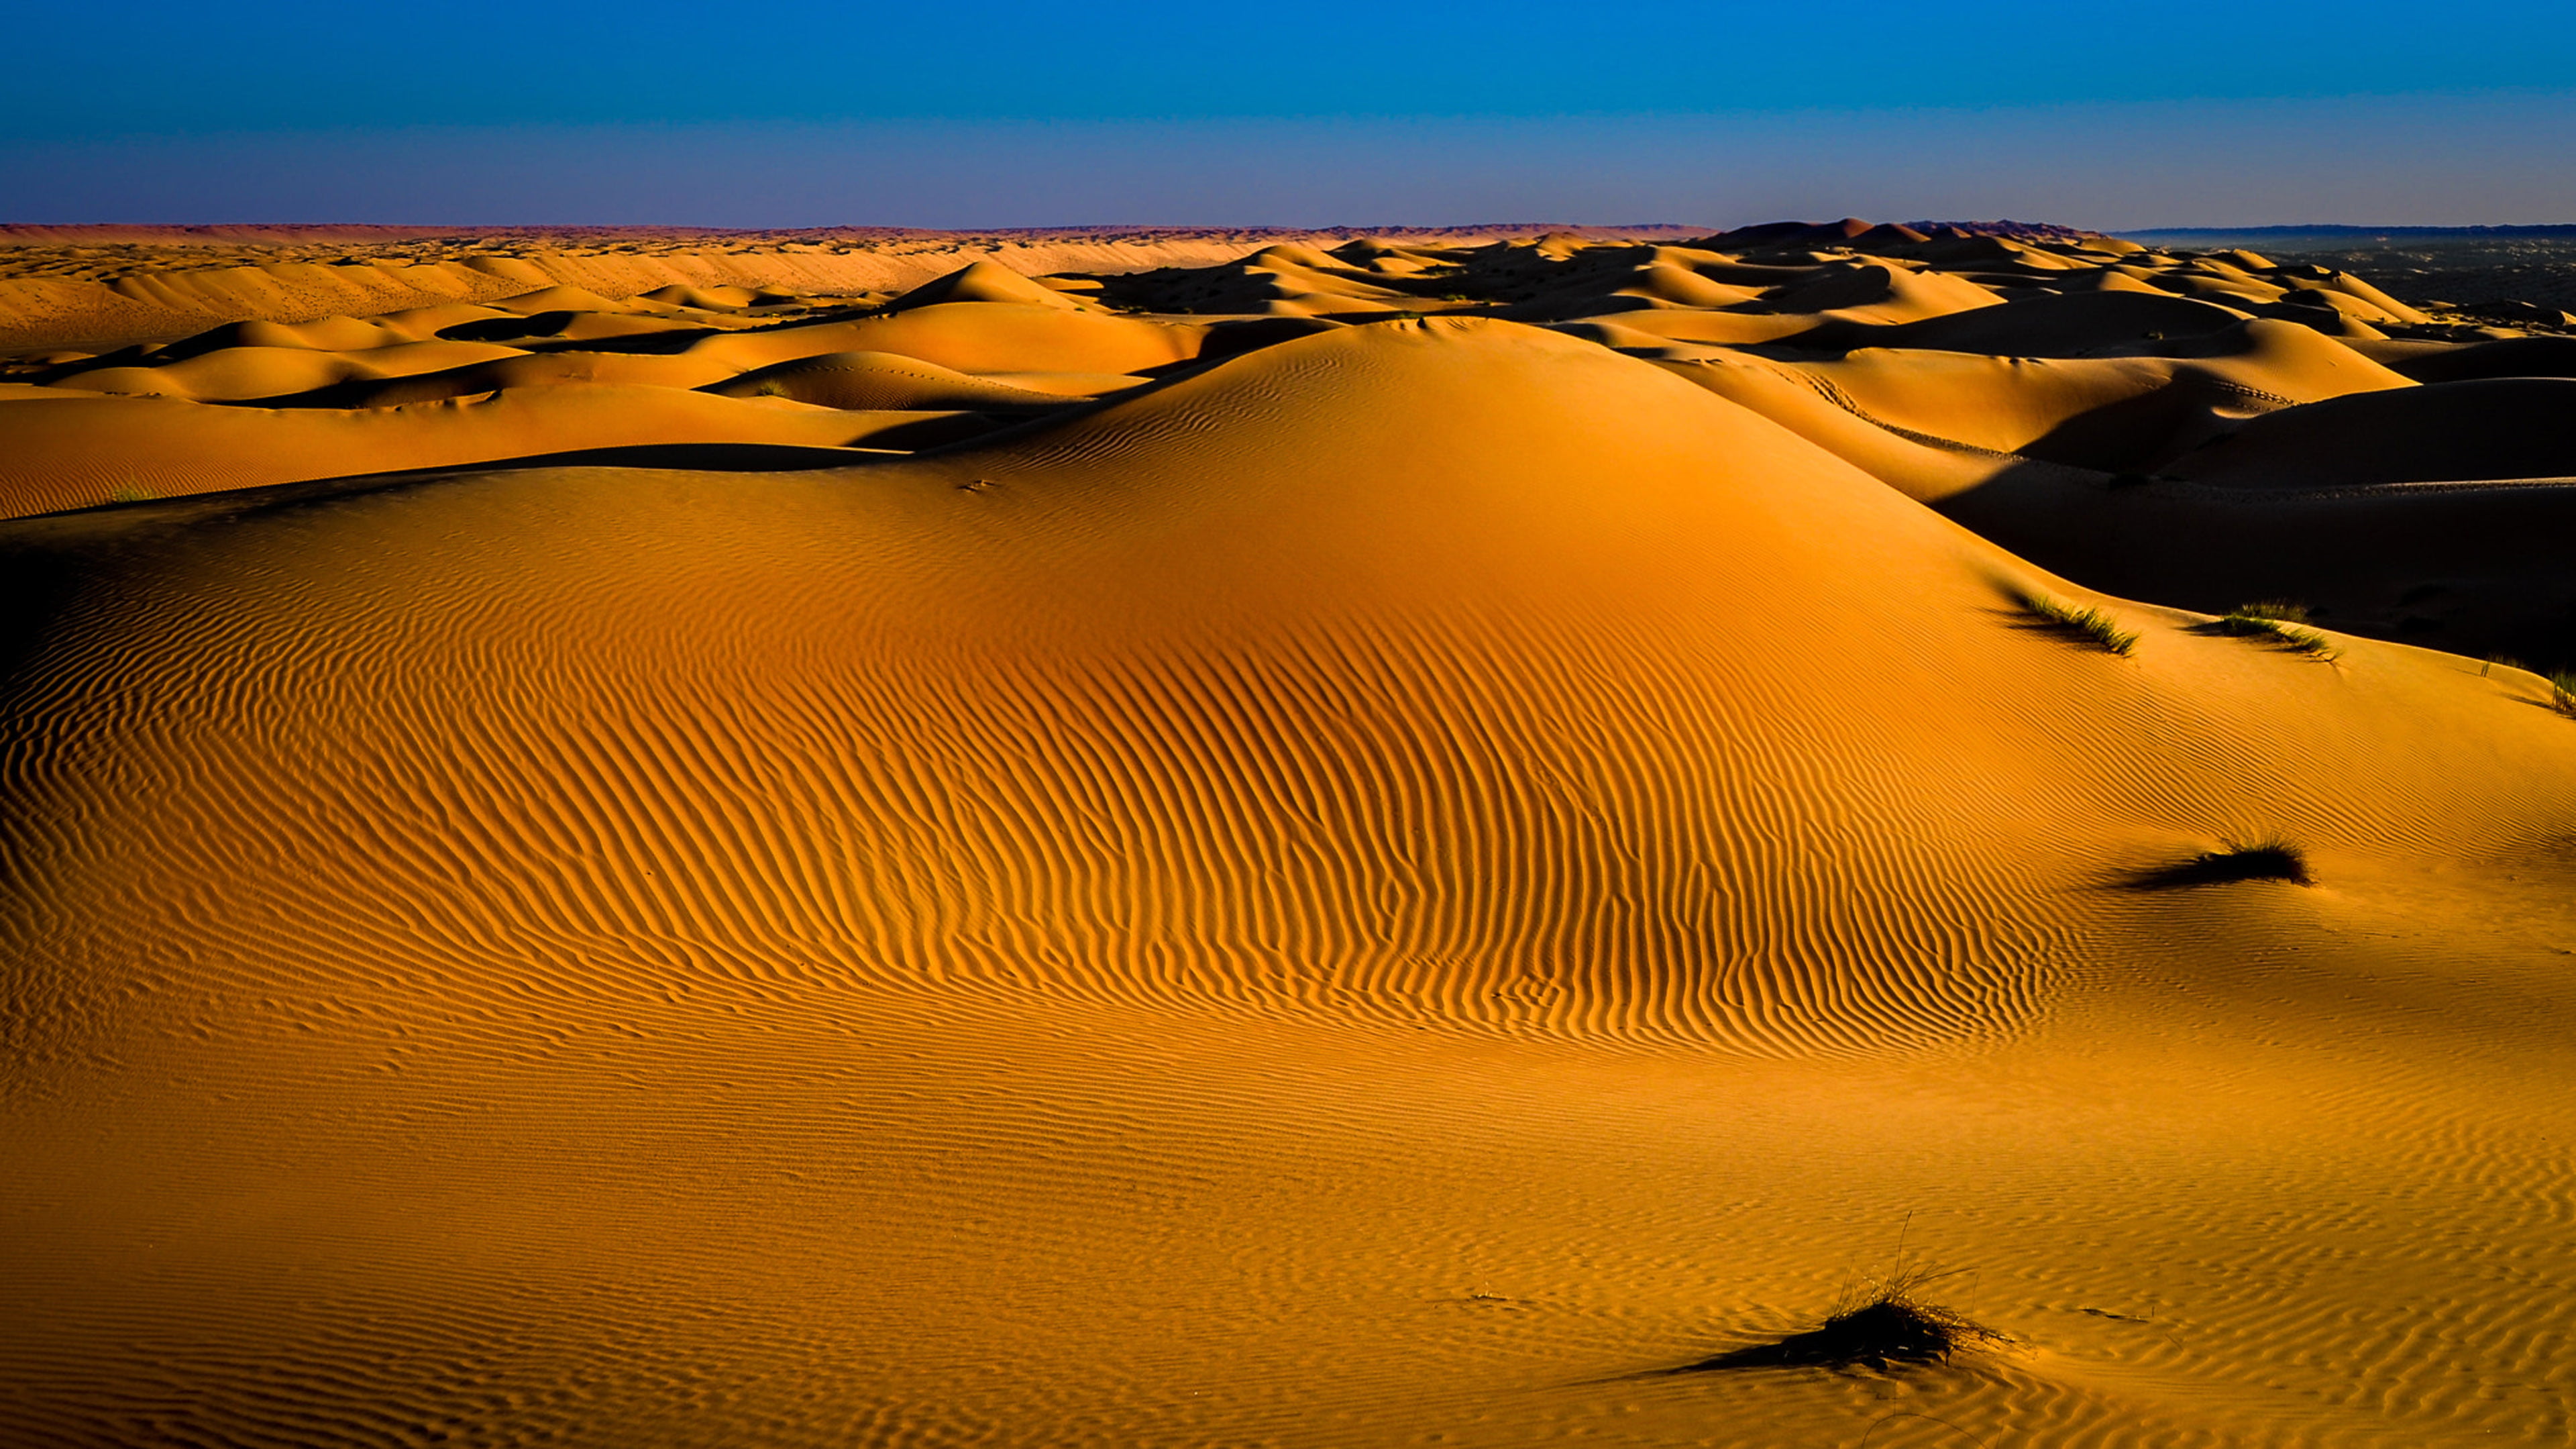 Red Sandy Hills Desert Scenery In Oman’s Desktop Hd Wallpapers For Mobile Phones Tablet And Pc 3840×2160